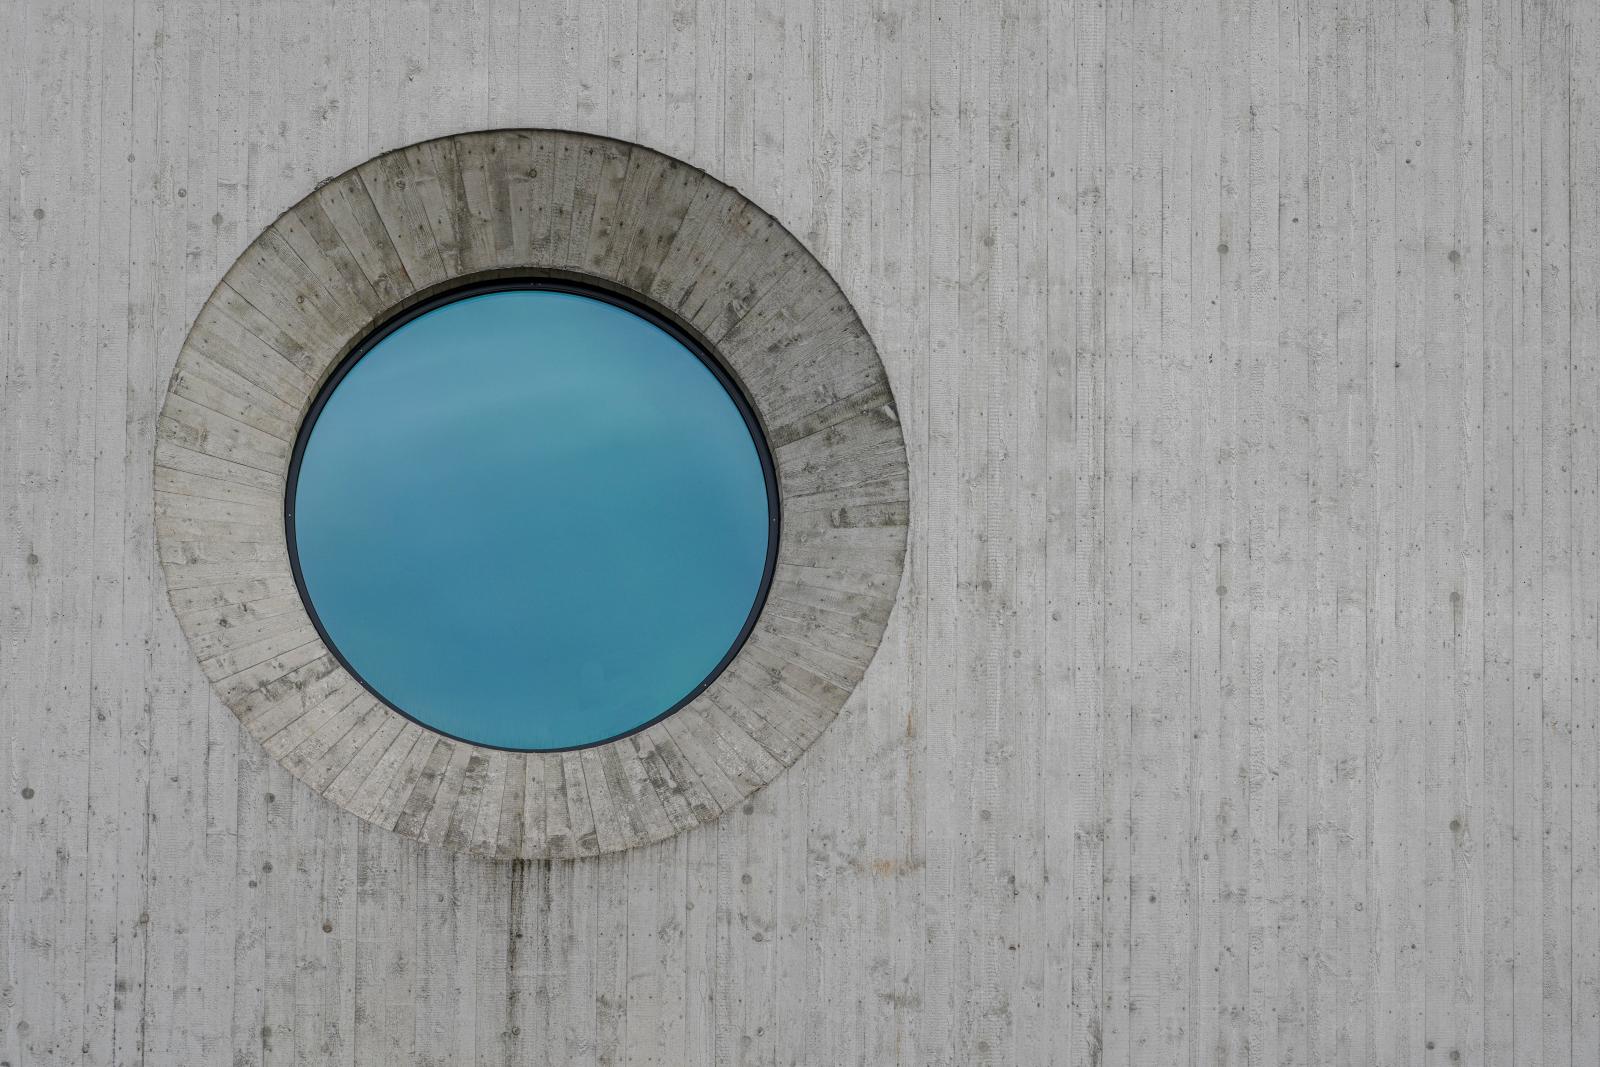 Architectural Solitude: Circle of Clarity | Buy this image